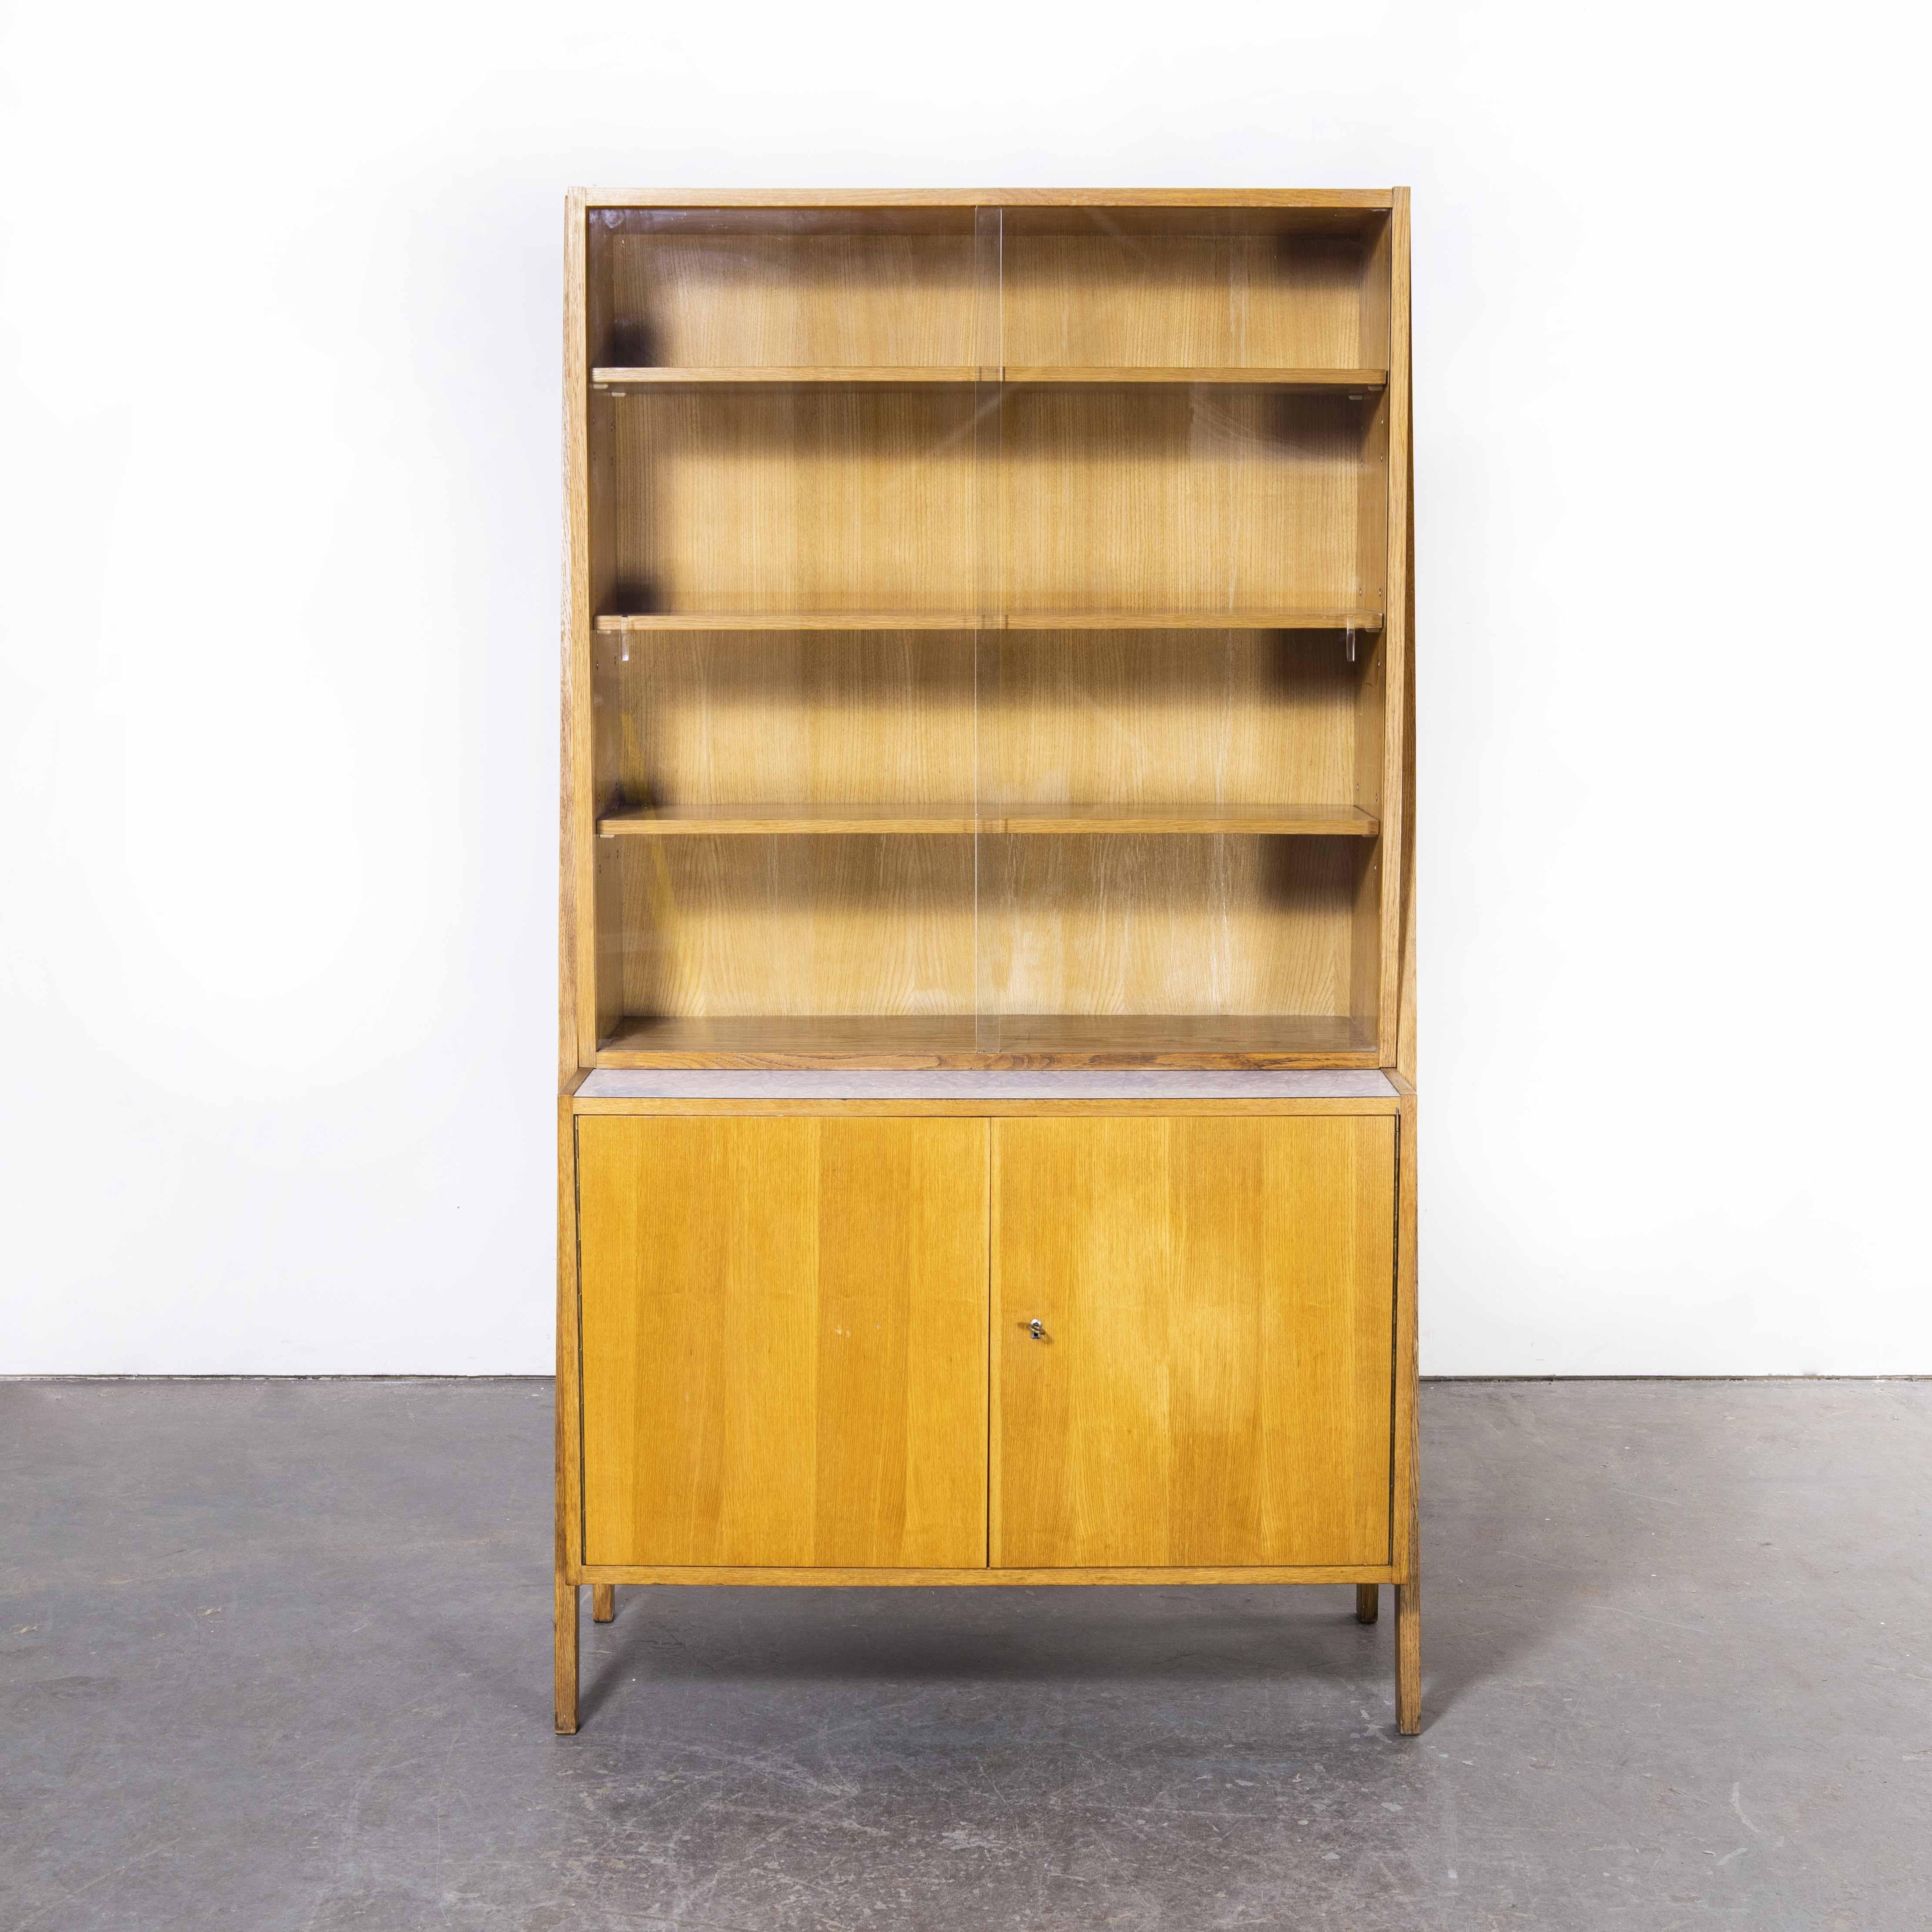 1970’s Large mid century glass fronted bookcase – cabinet
1970’s Large mid century glass fronted bookcase – cabinet. Beautiful simple and classic mid century shelving unit sourced in the Czech Republic. The carcass and external frame are made from